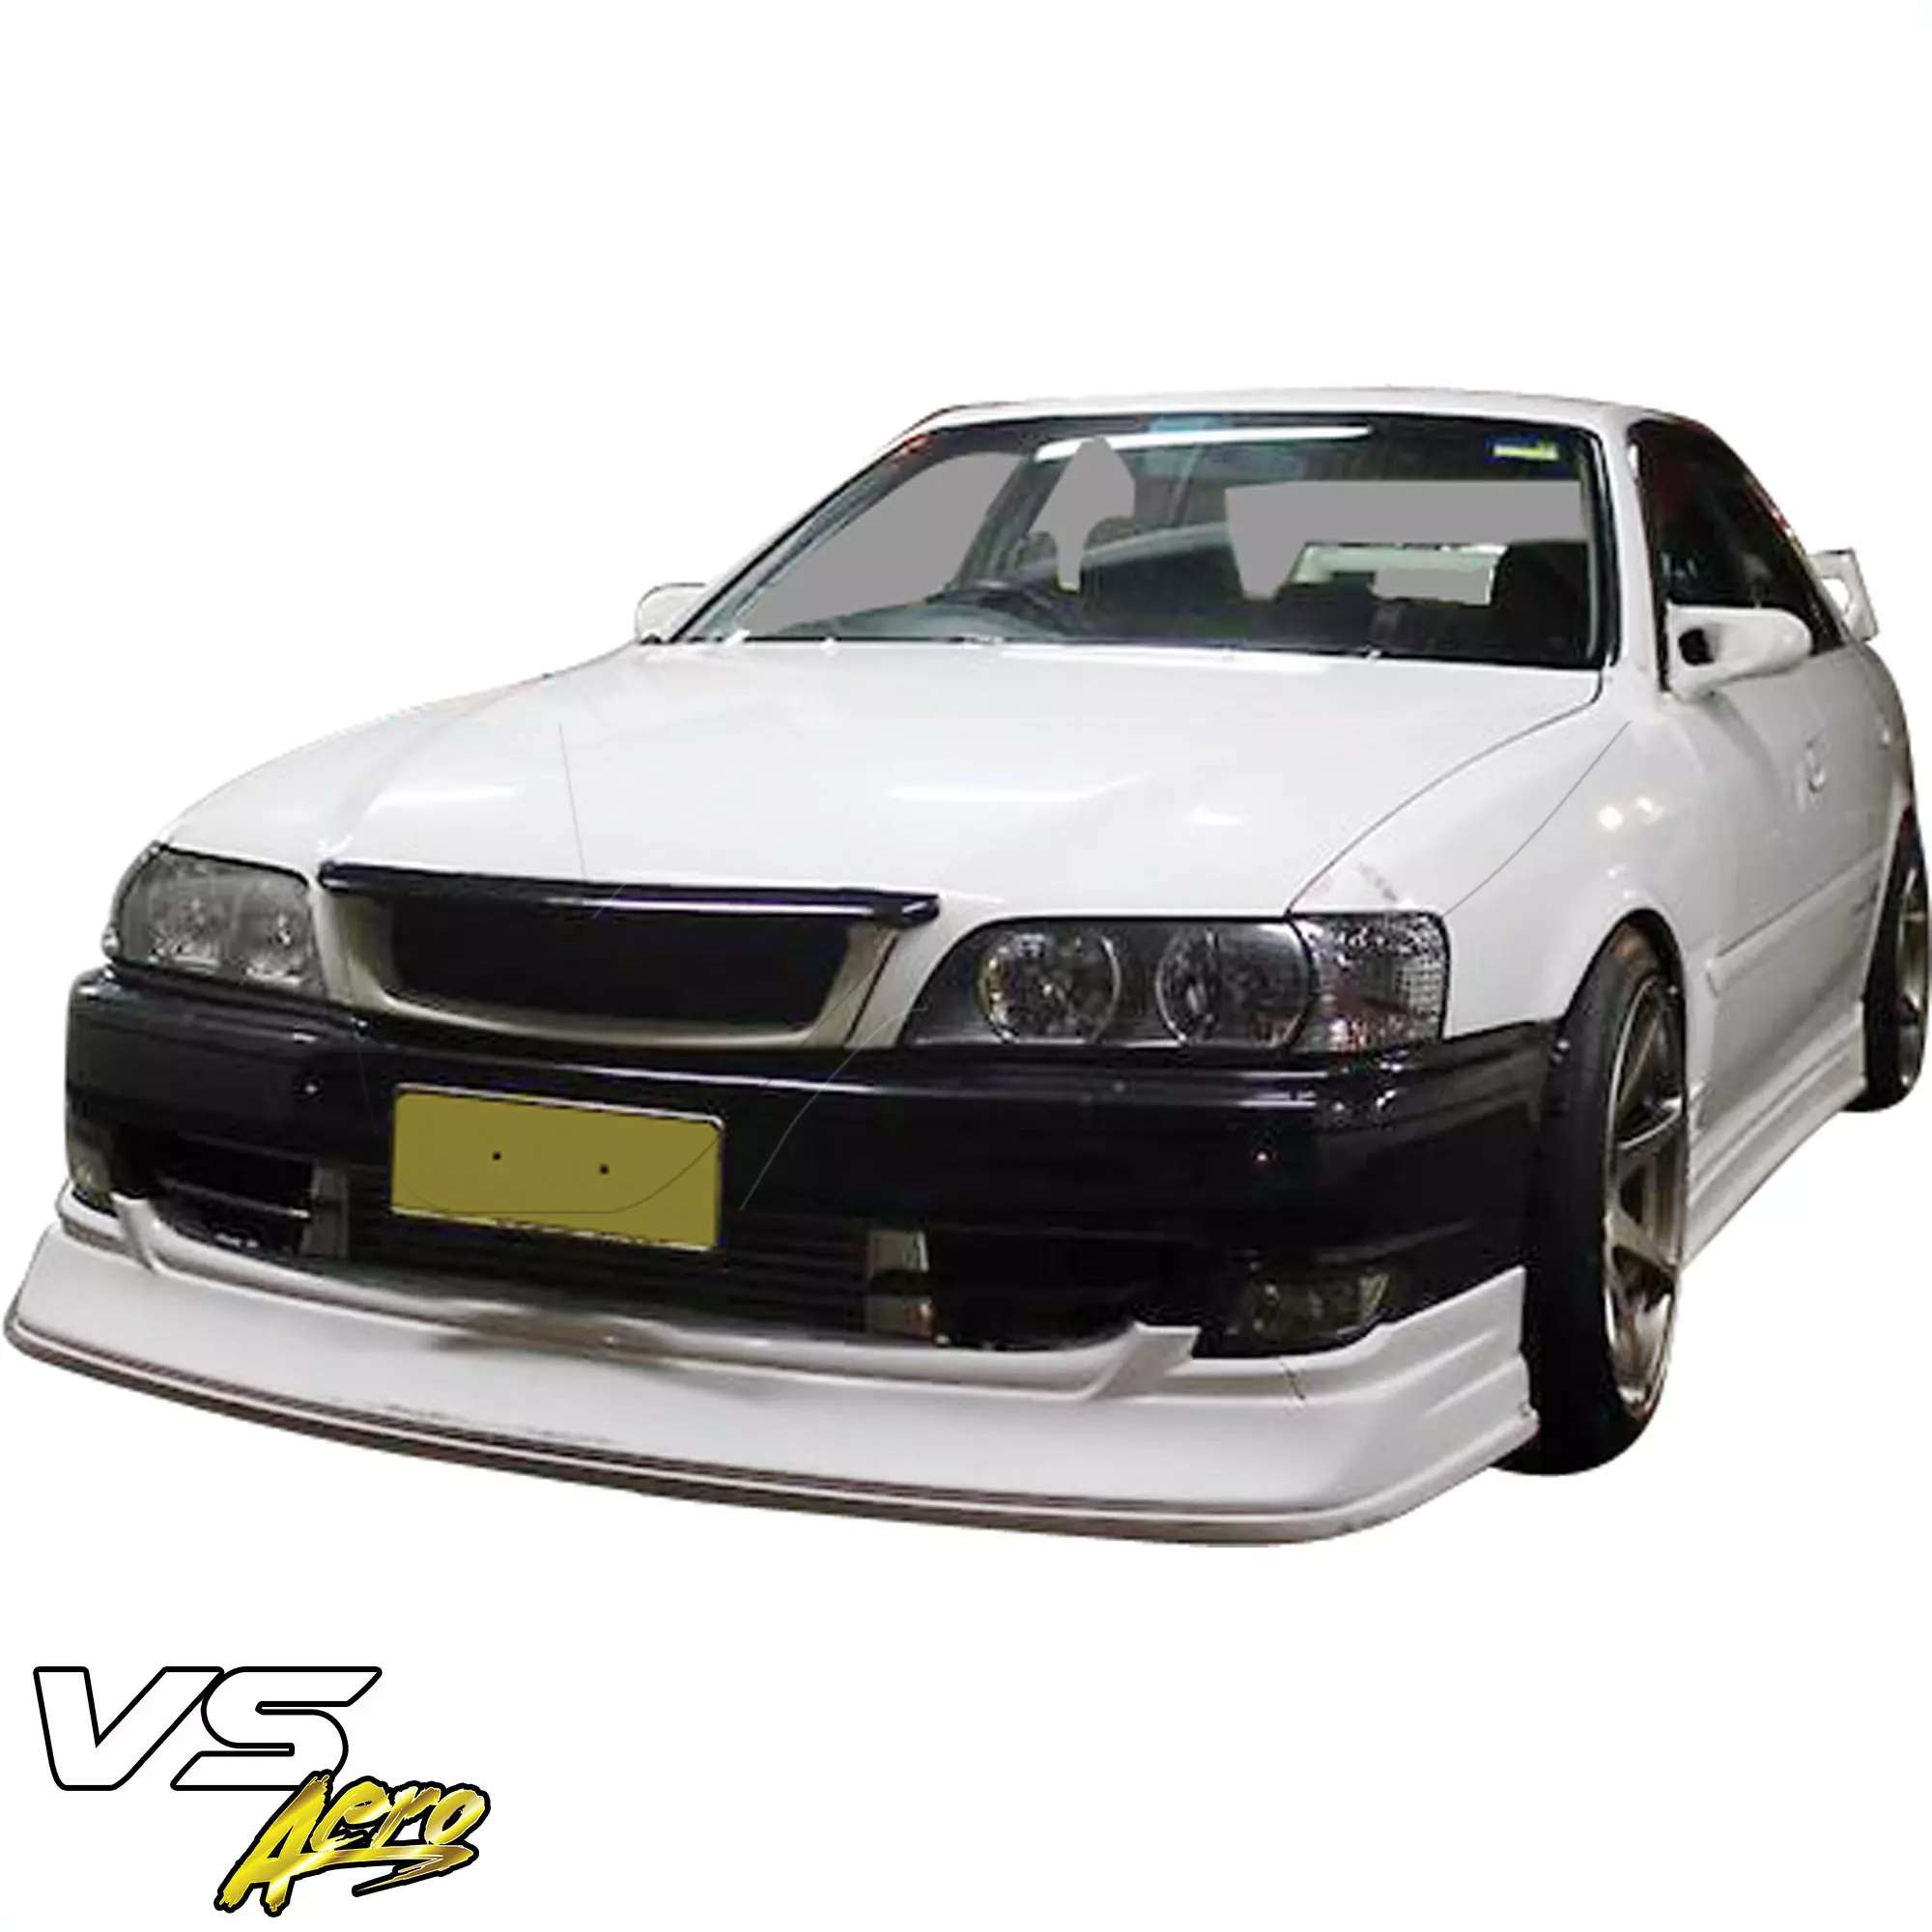 VSaero FRP TRAU Late Front Lip Valance > Toyota Chaser JZX100 1999-2000 - Image 30